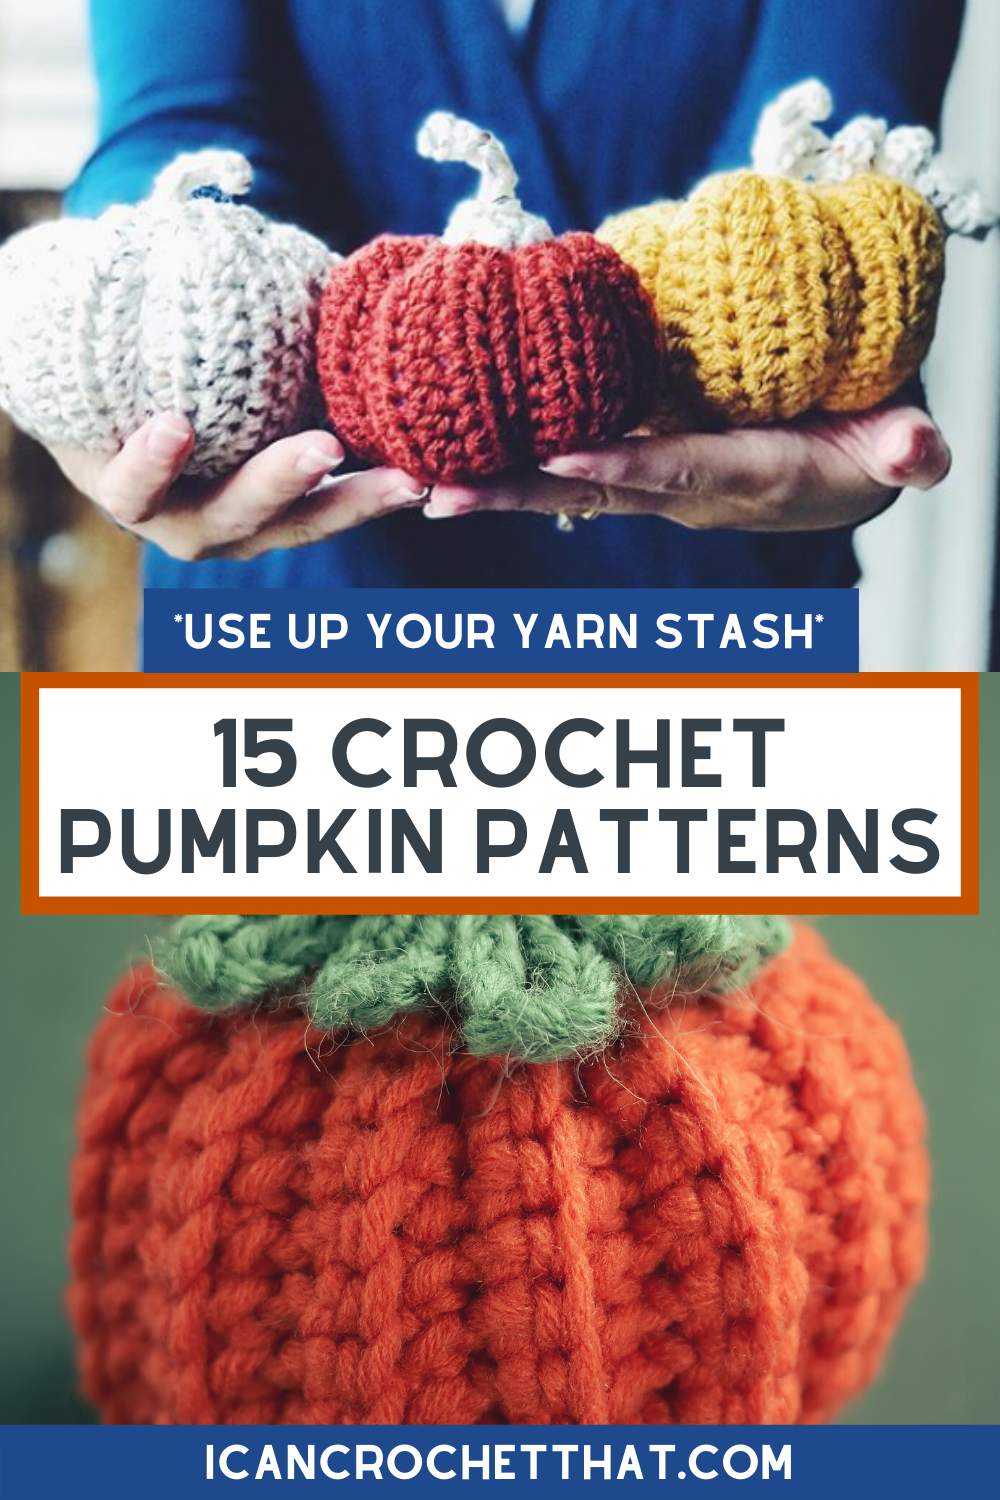 15 Crochet Pumpkin Patterns to Get You Ready for Fall